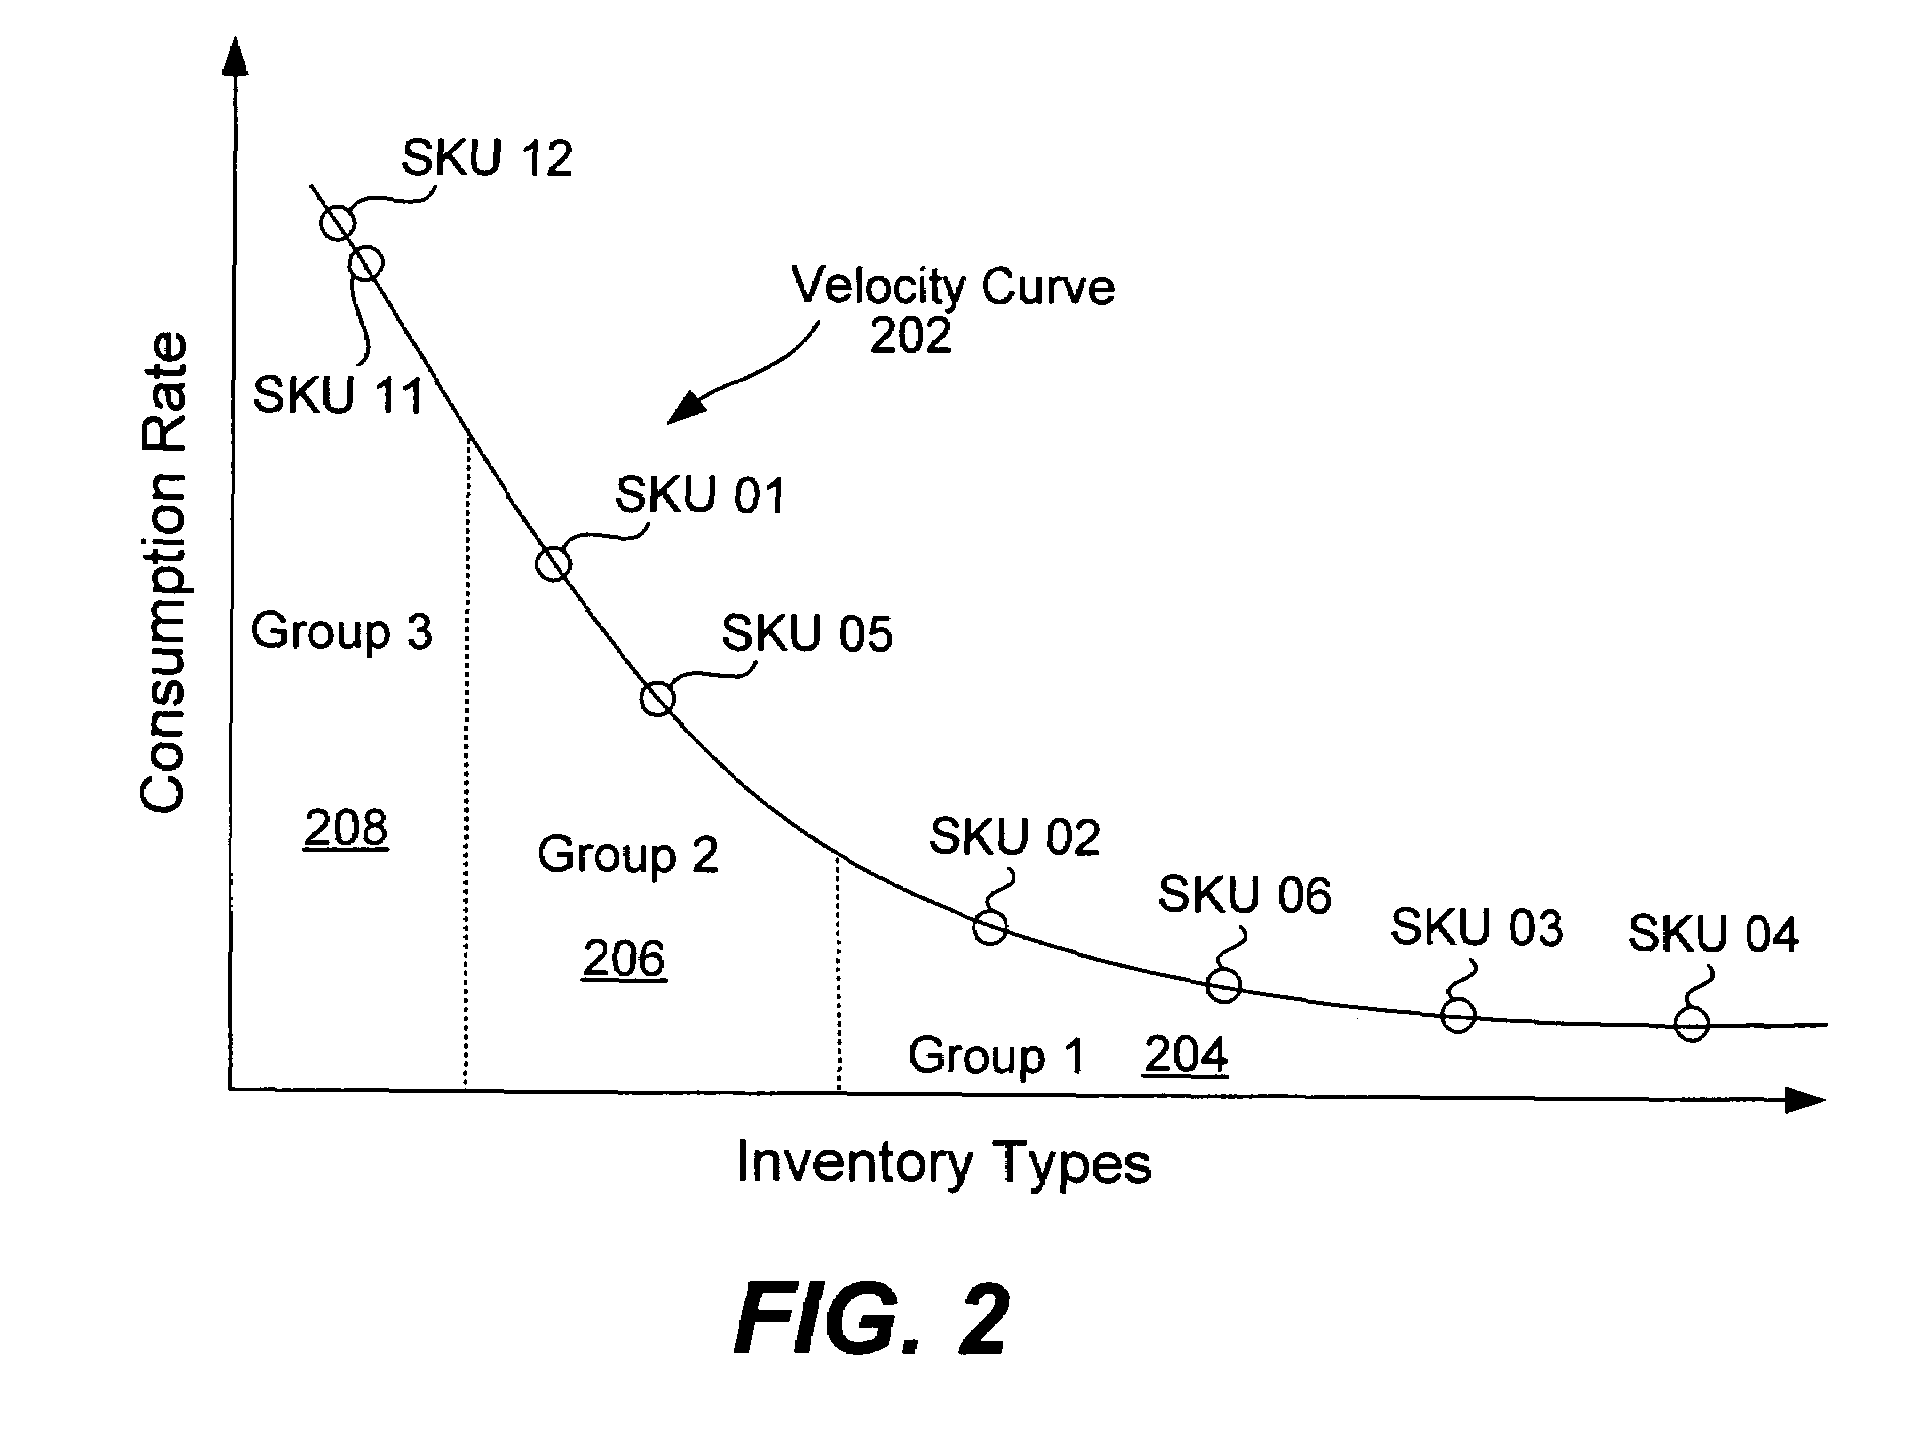 Inventory replication based upon order fulfillment rates